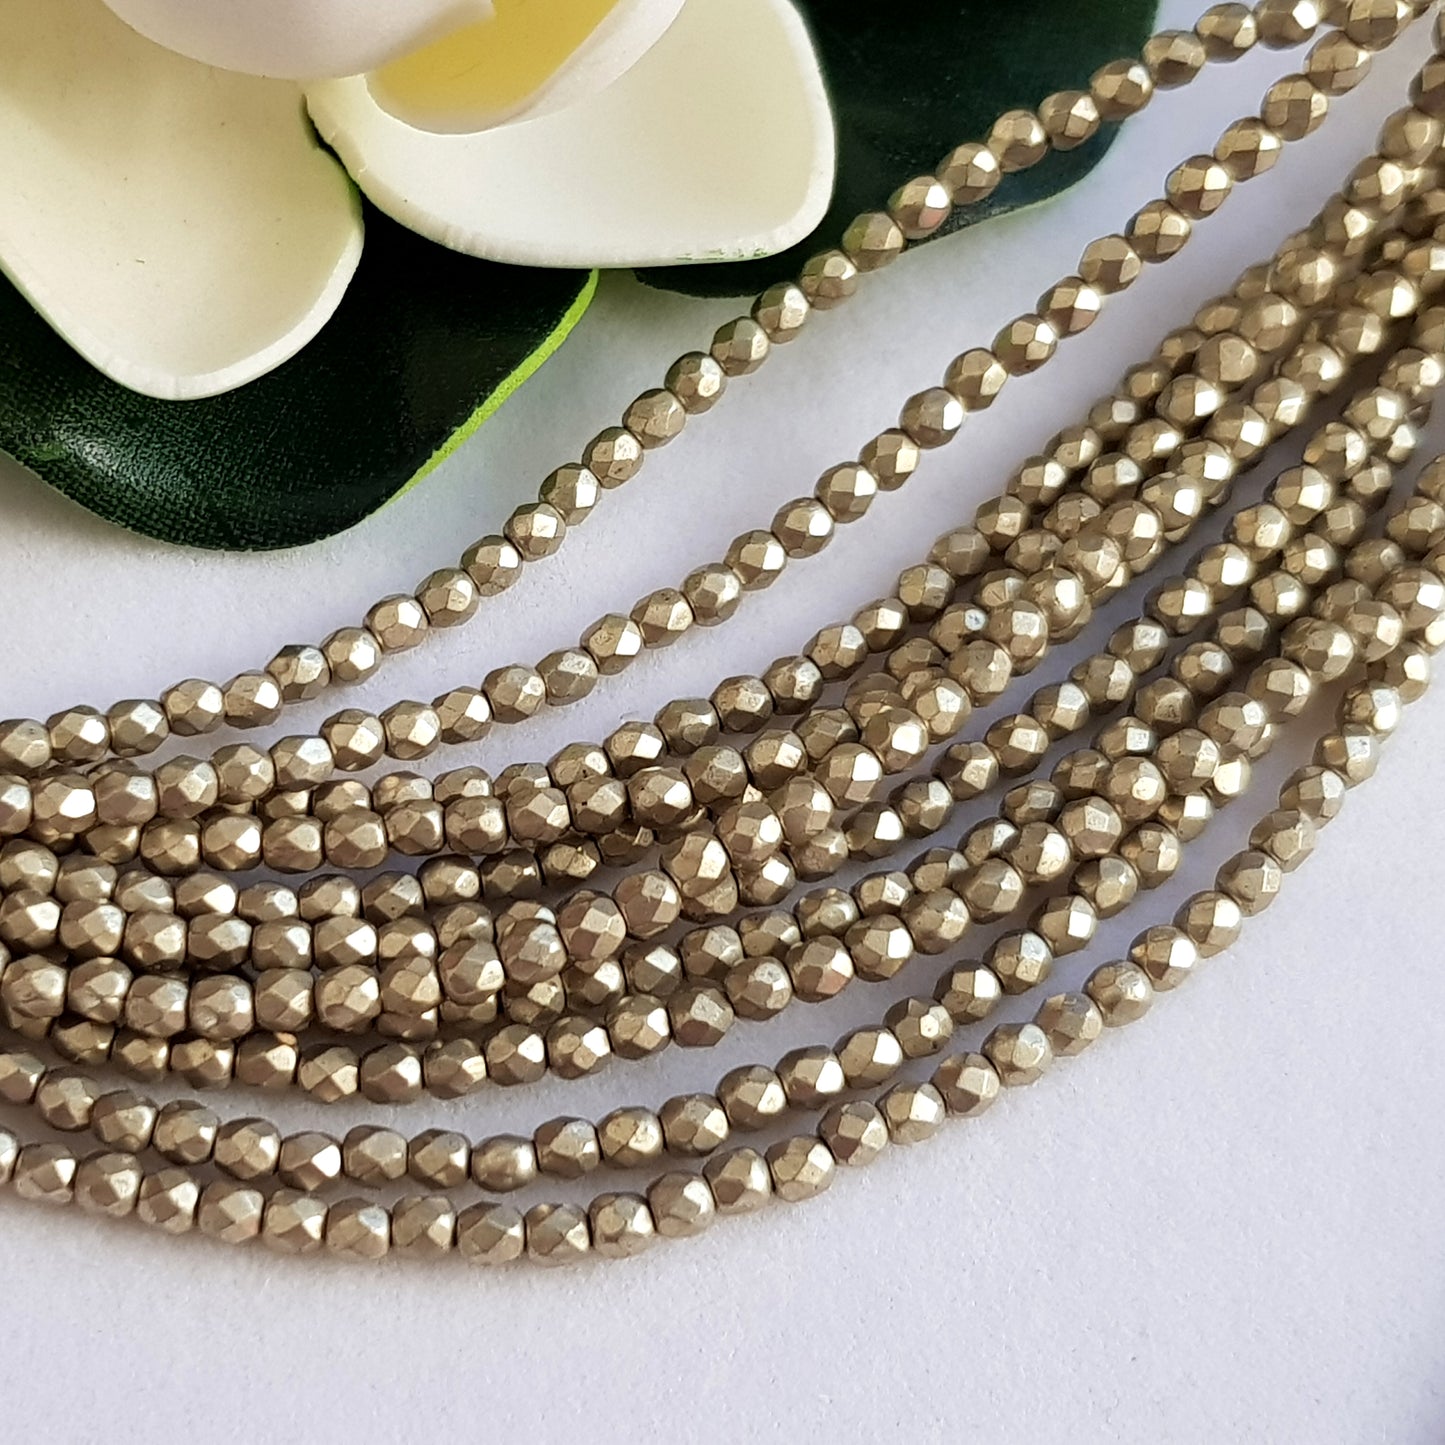 Czech Fire Polished 50 Bead Strand - Suede Gold Cloud Dream 3mm Round Faceted  |  FP-08A05-CB-03 | Beading Supply